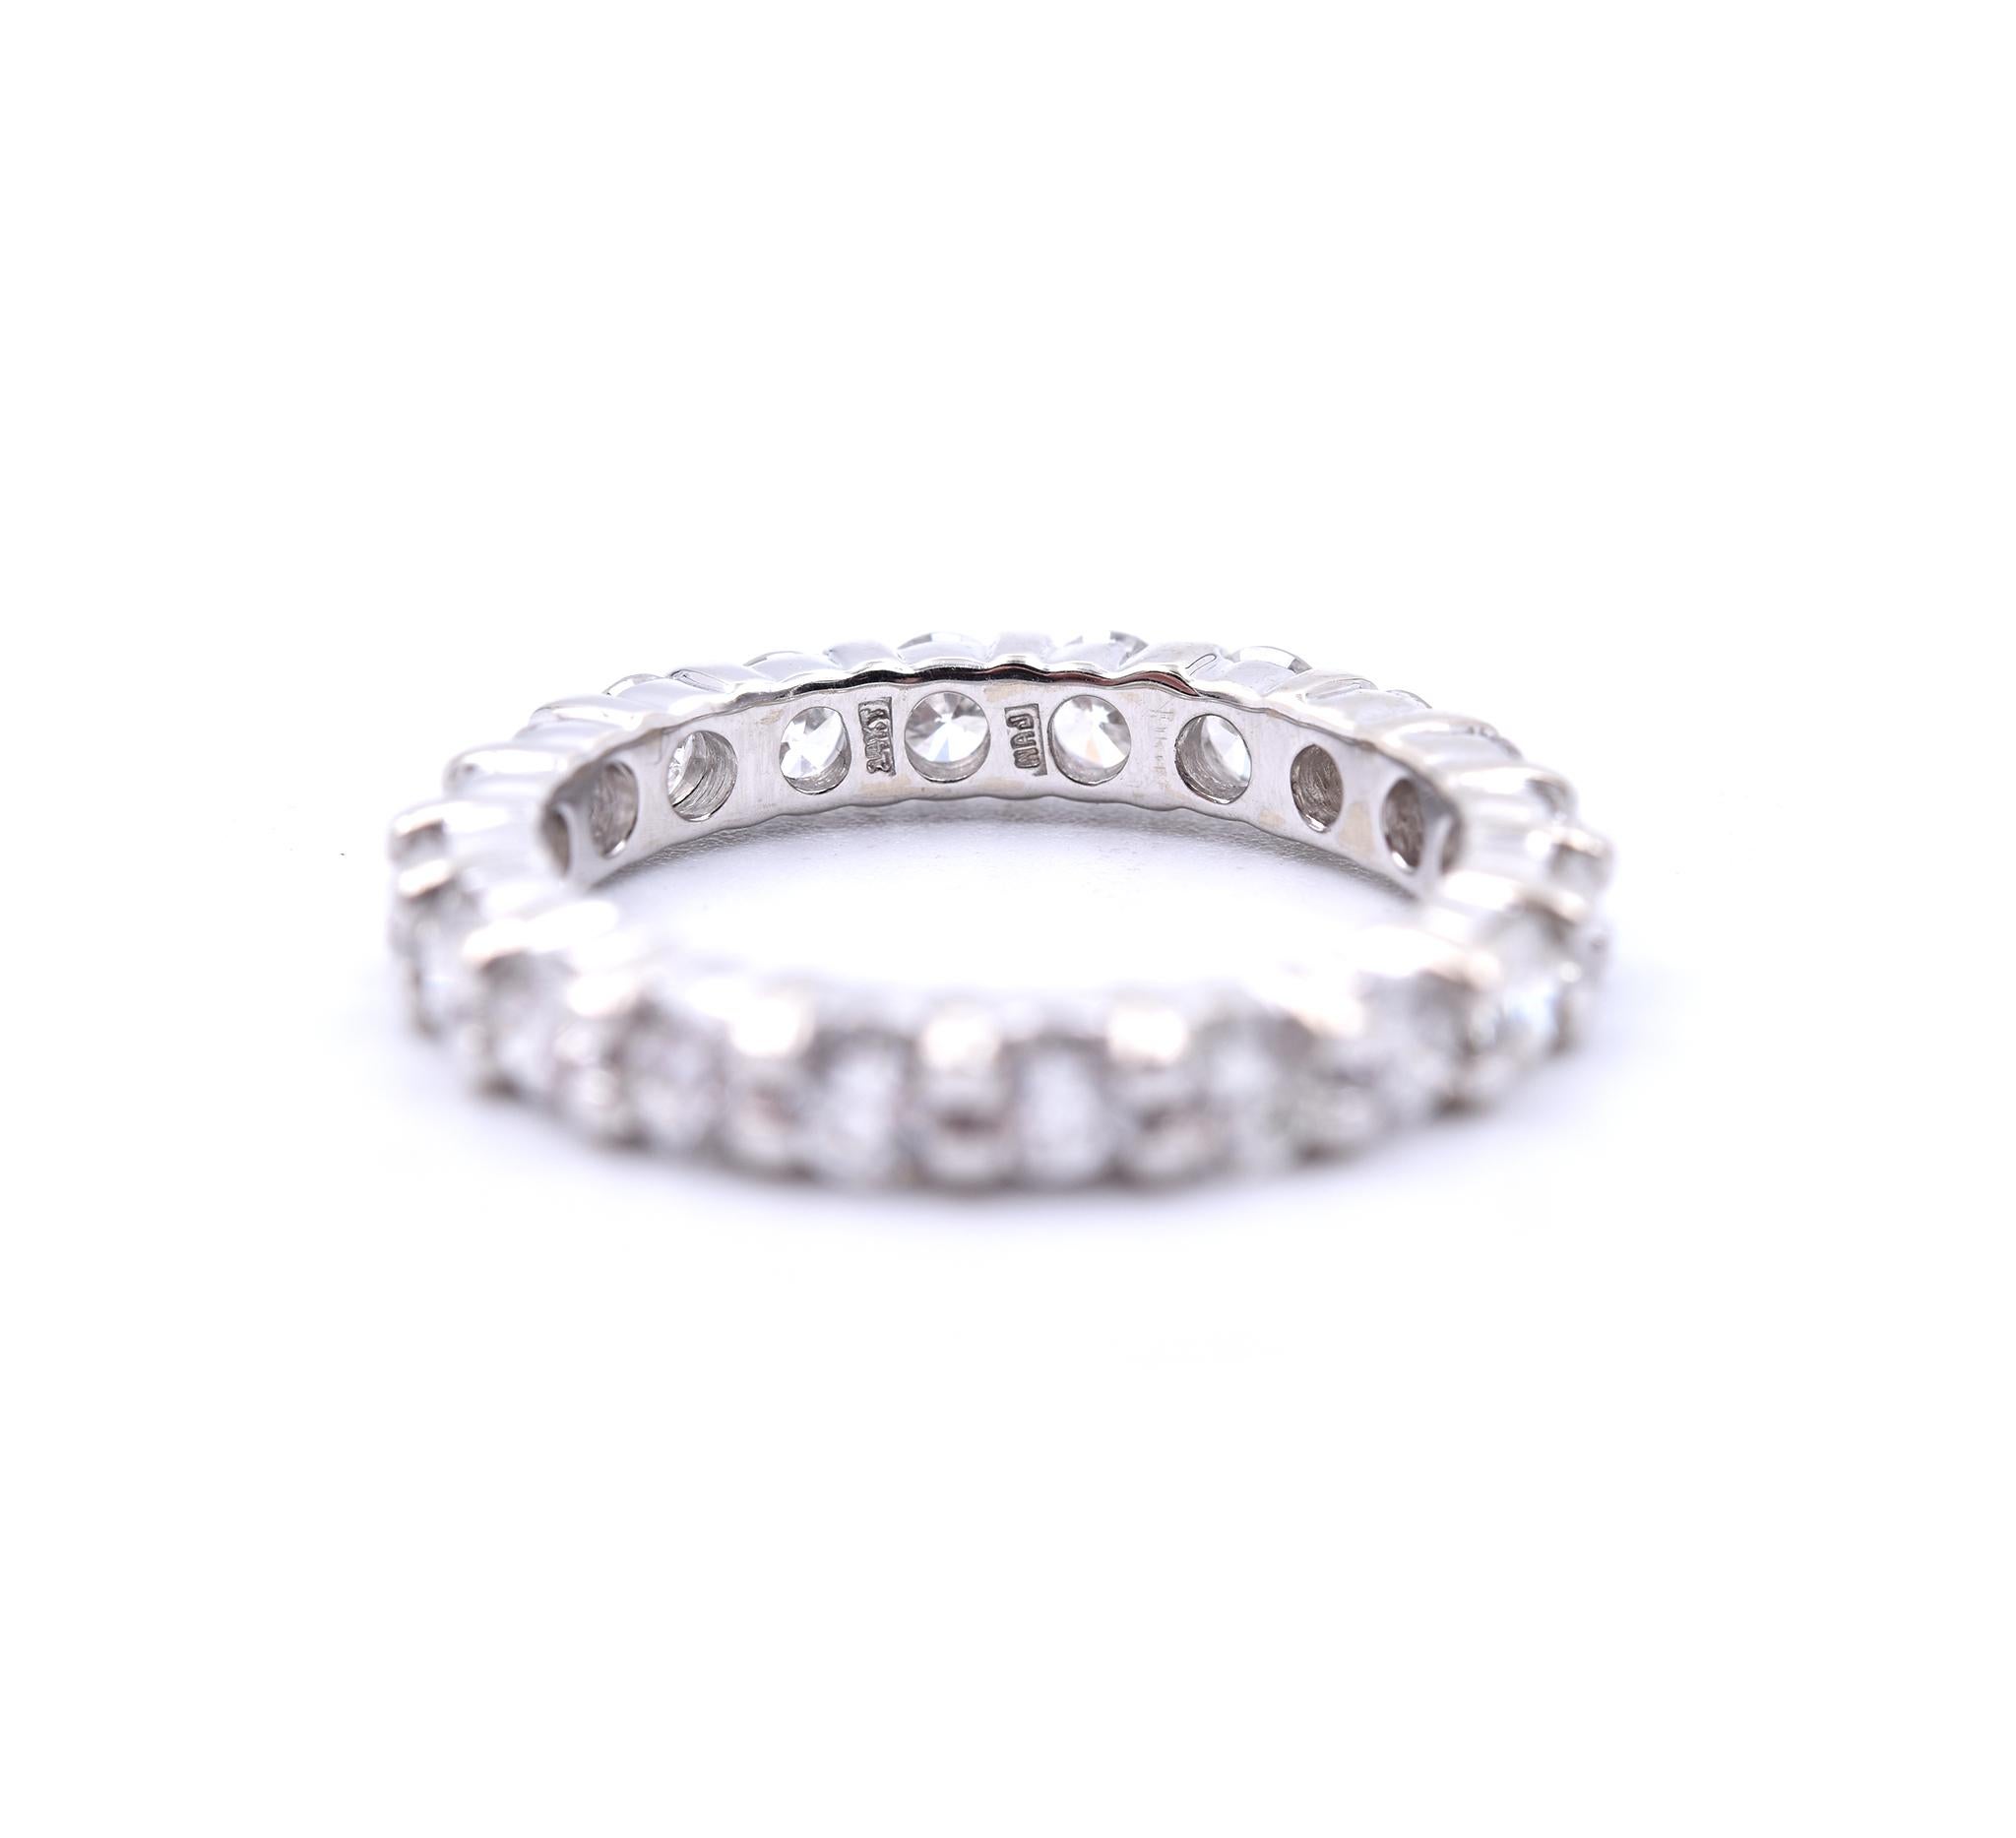 
Designer: custom
Material: 14k white gold
Diamonds: 20 round brilliant cuts = 1.60cttw
Color: G-H
Clarity: SI
Size: 6 (please allow two additional shipping days for sizing requests)  
Dimensions: ring measures 3.15mm in width
Weight: 3.60 grams
